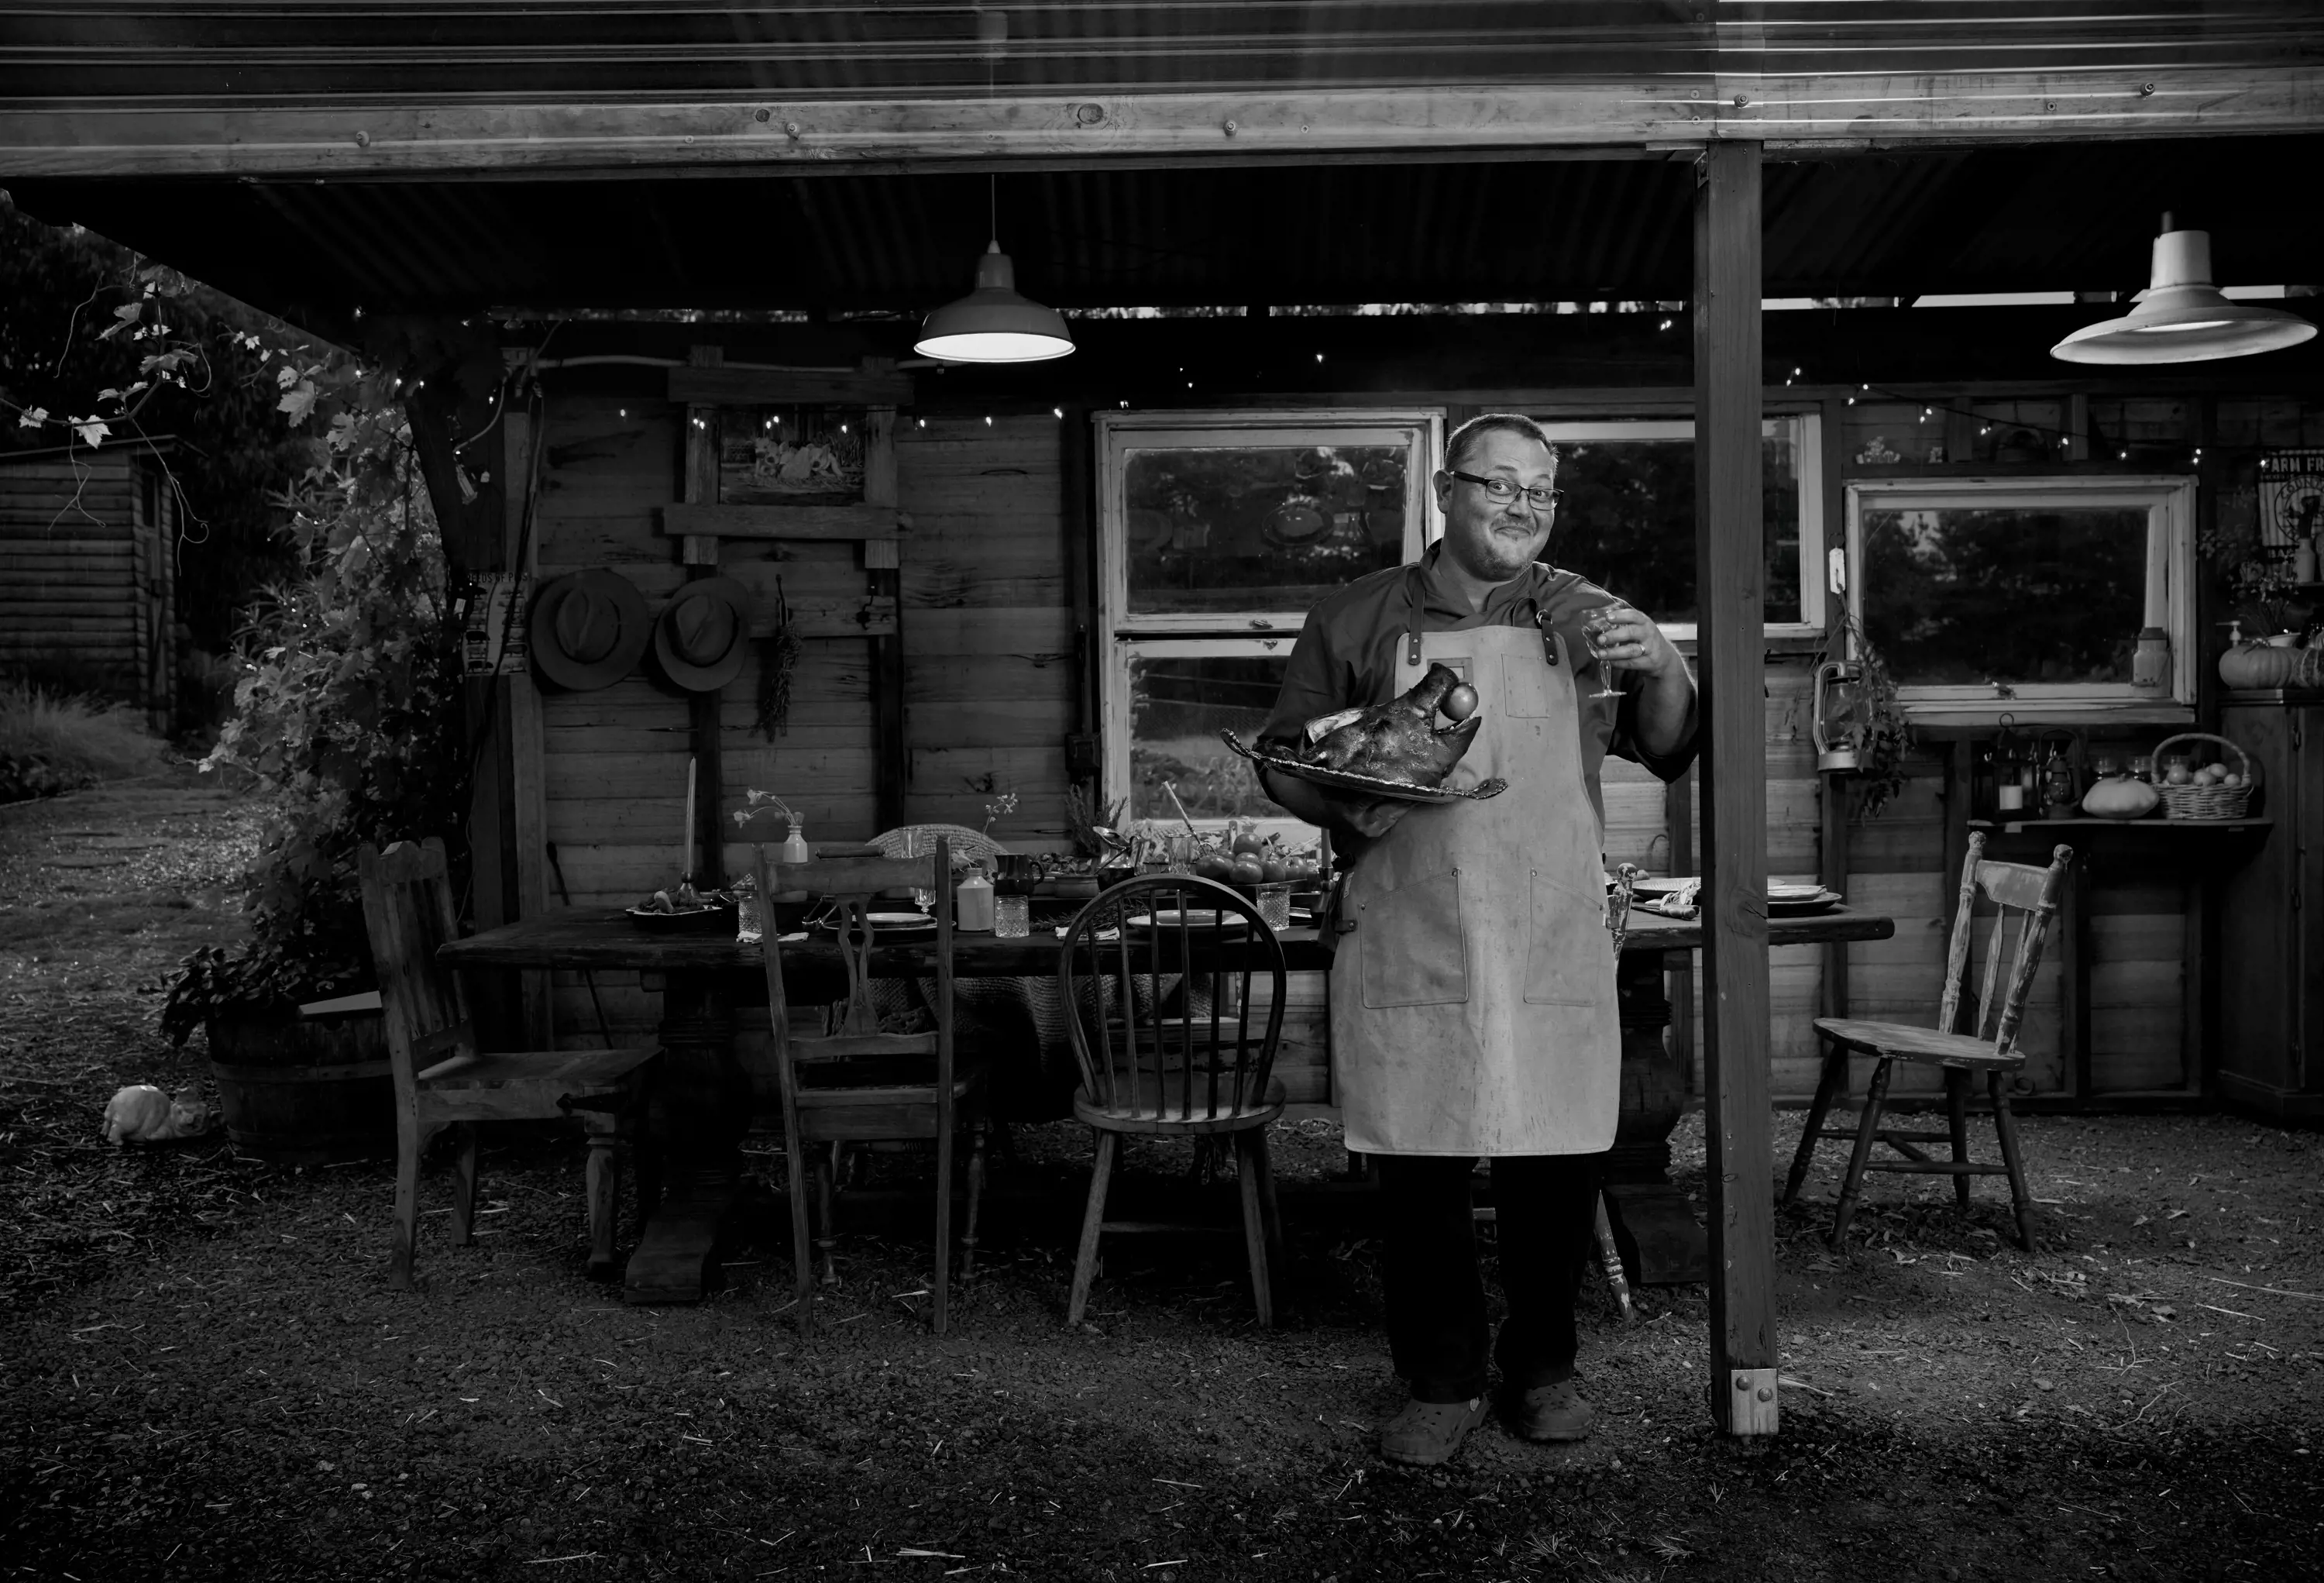 A man wearing glasses and a cooking apron stands under a verandah holding a glass of wine and pig's head on a plate.